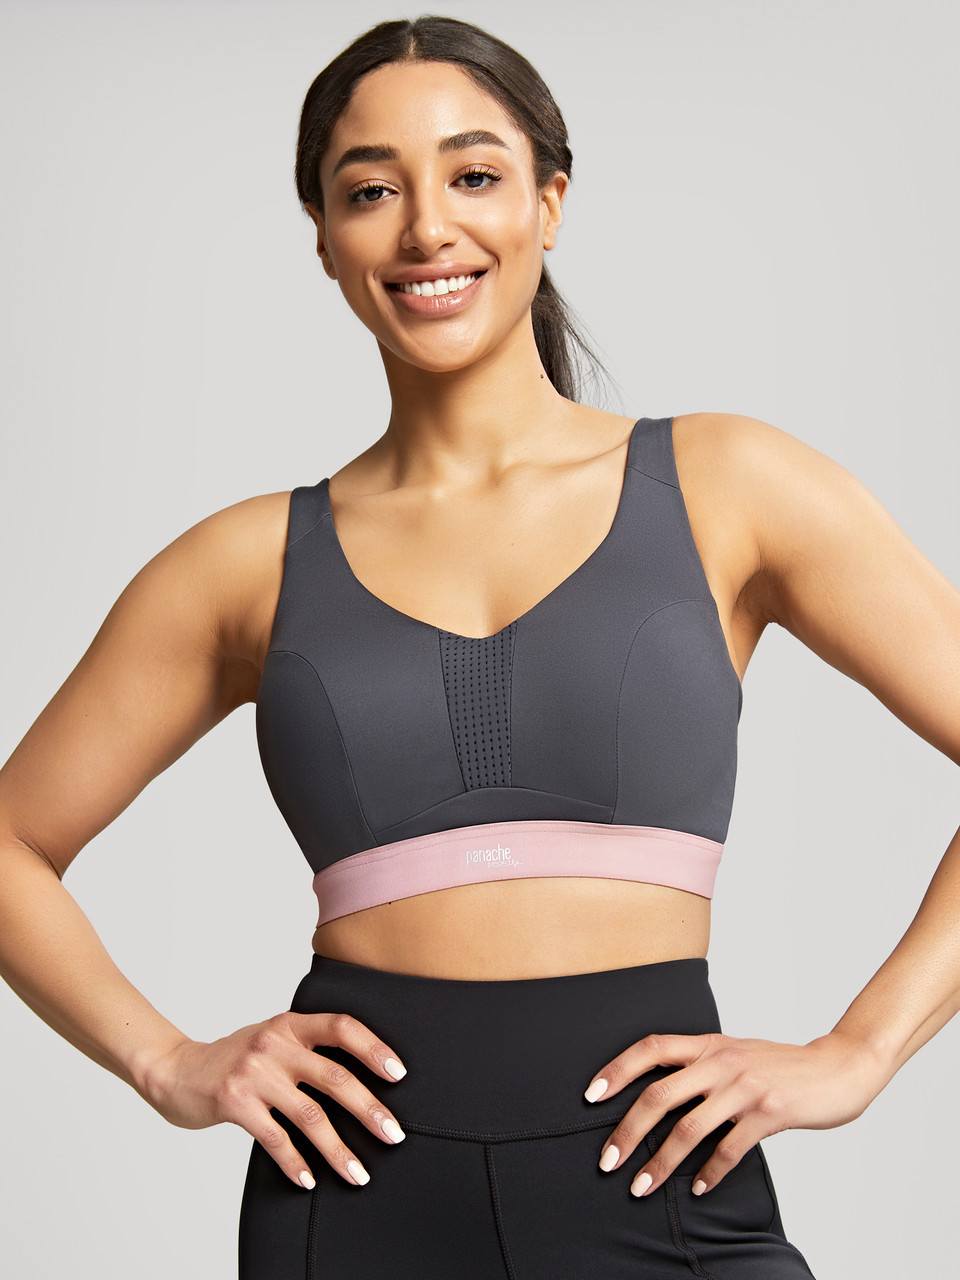 Panache Ultra Perform Non Padded Wired Sports Bra in Charcoal